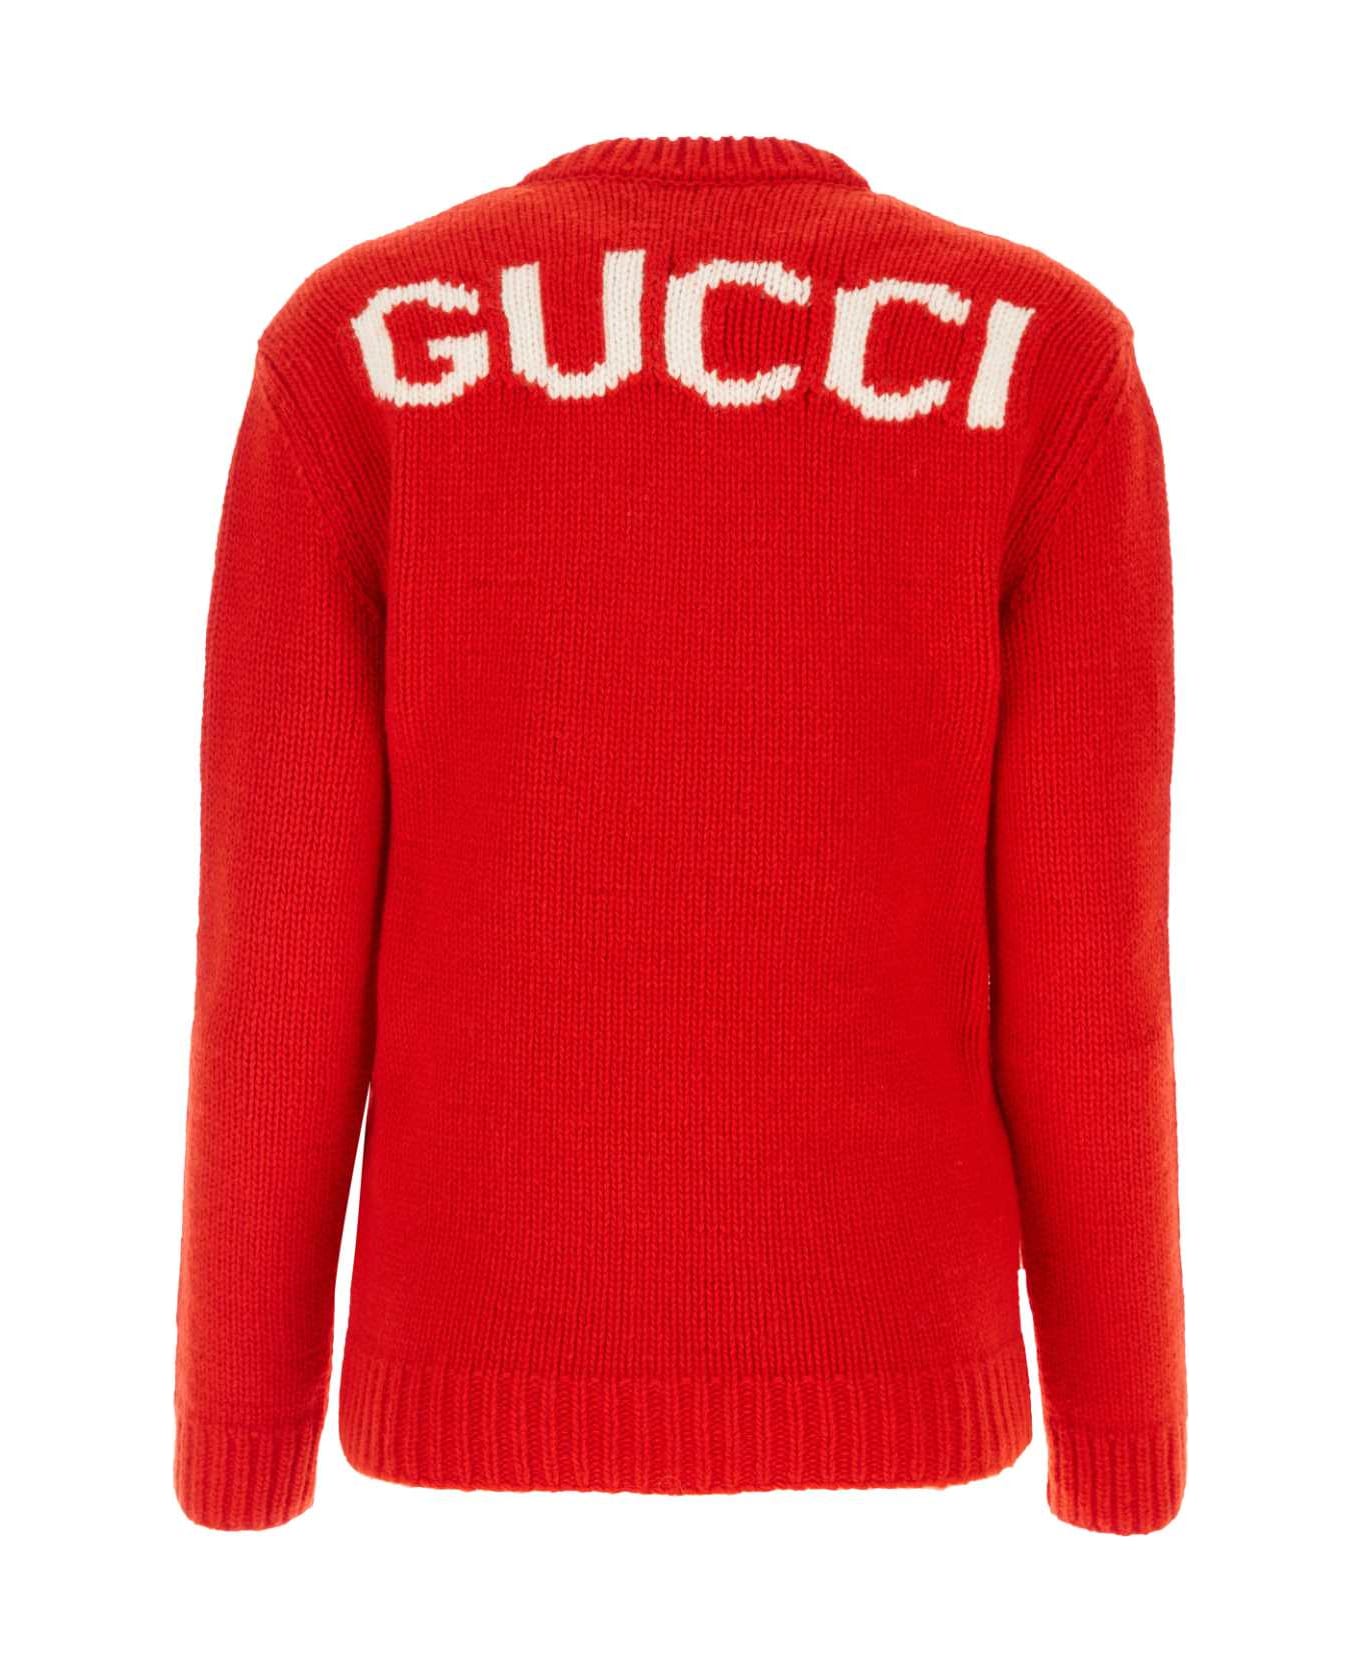 Gucci Red Wool Sweater - REDIVORY ニットウェア